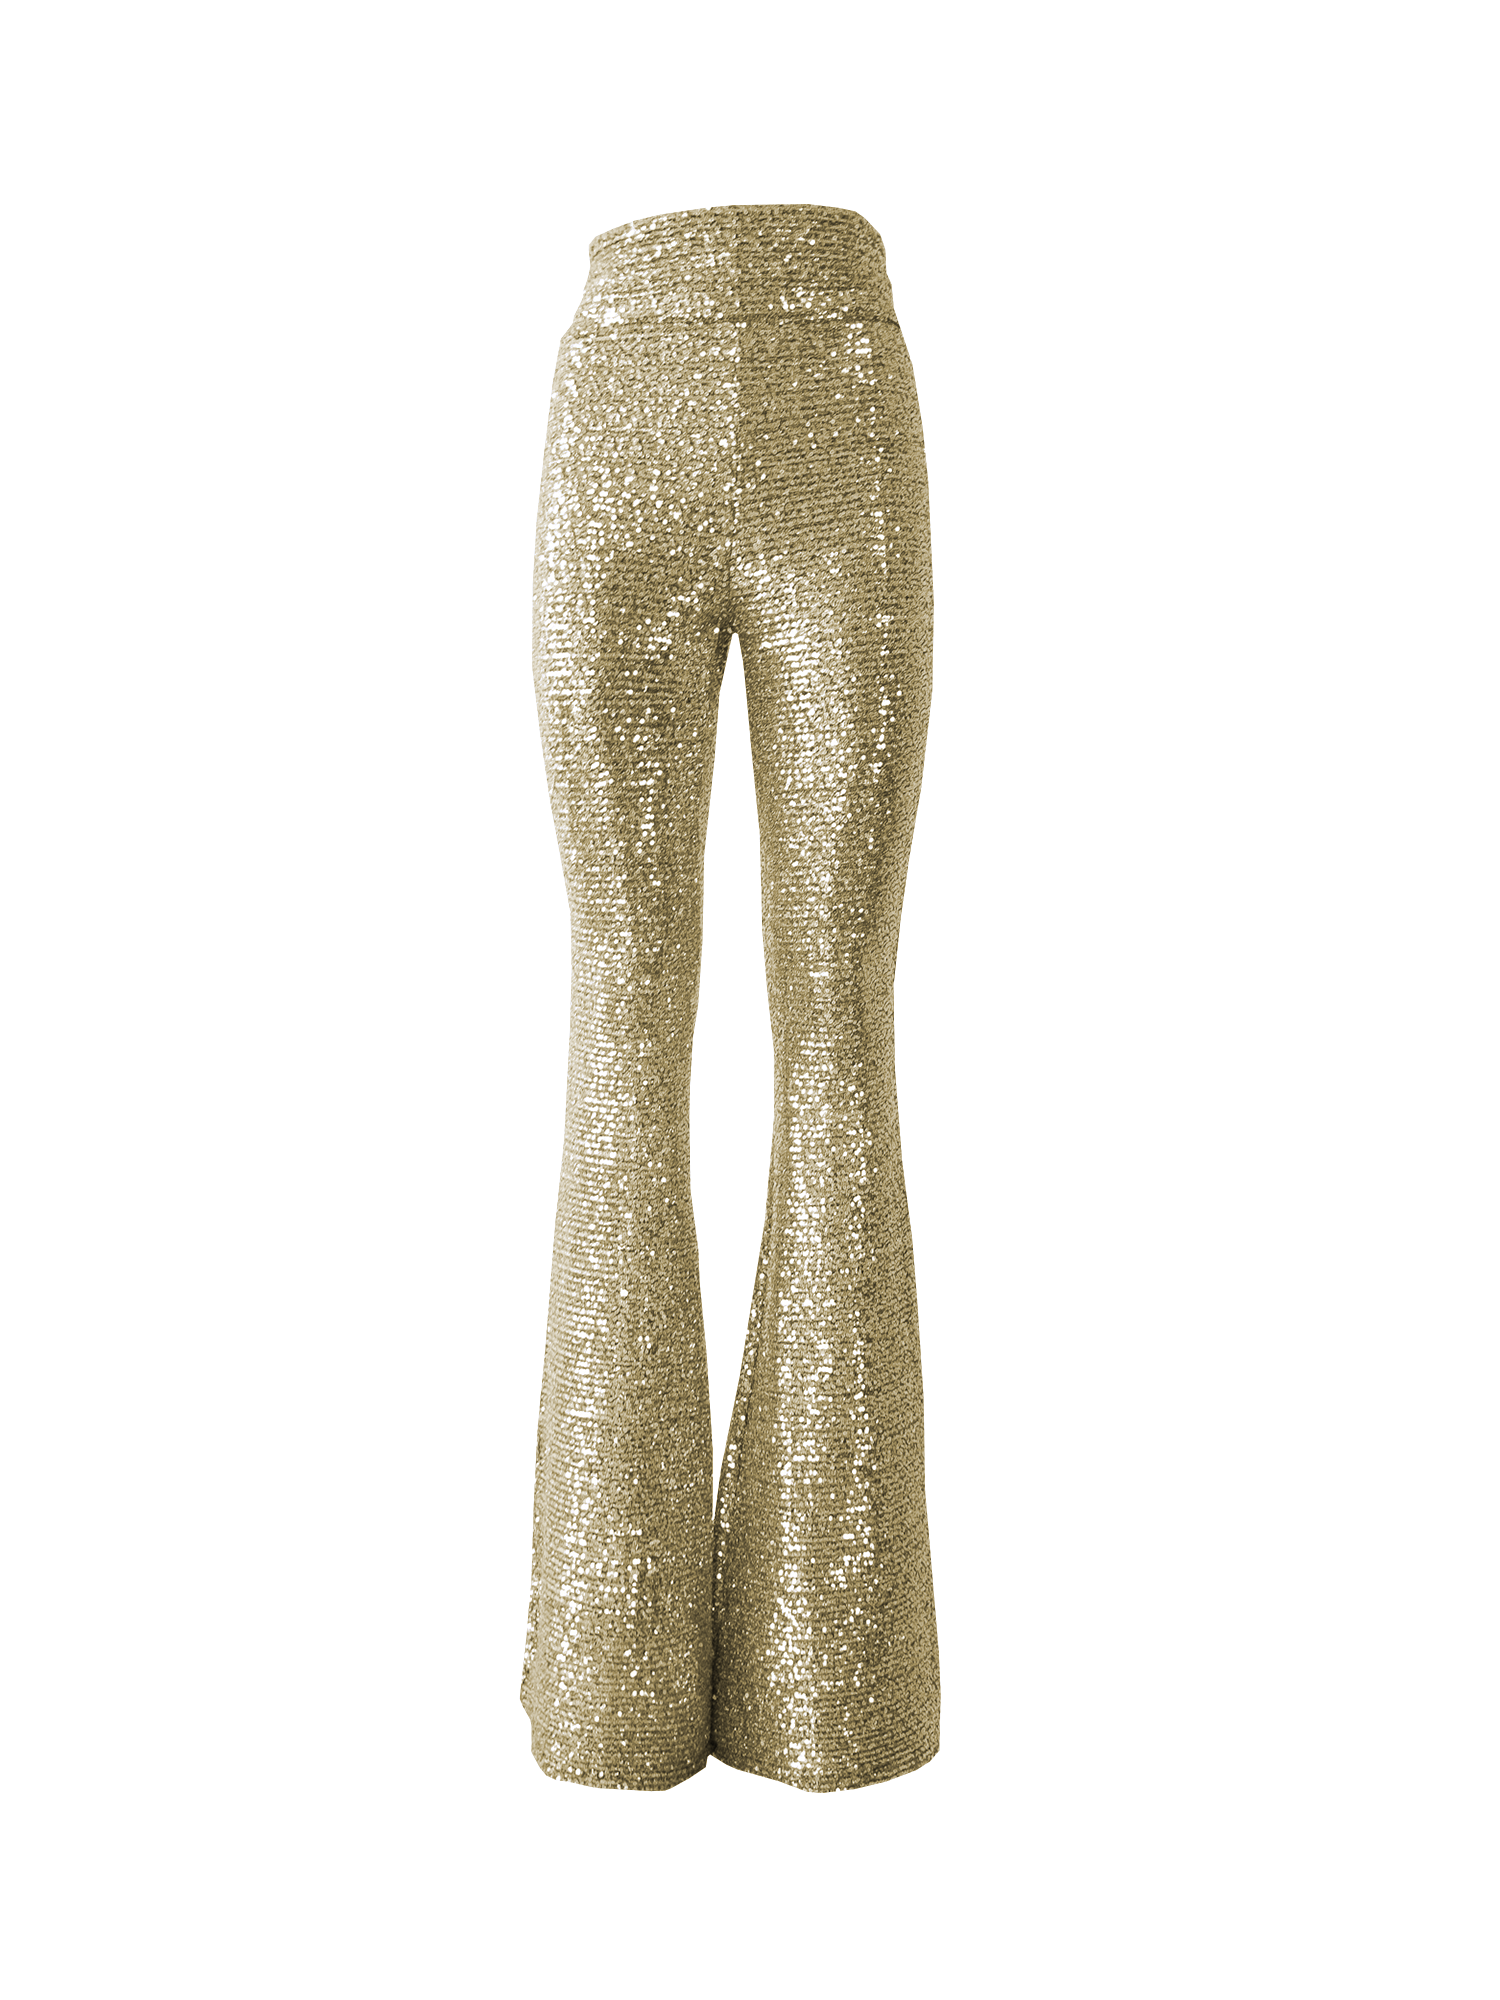 LOLA - flared pants in gold sequins